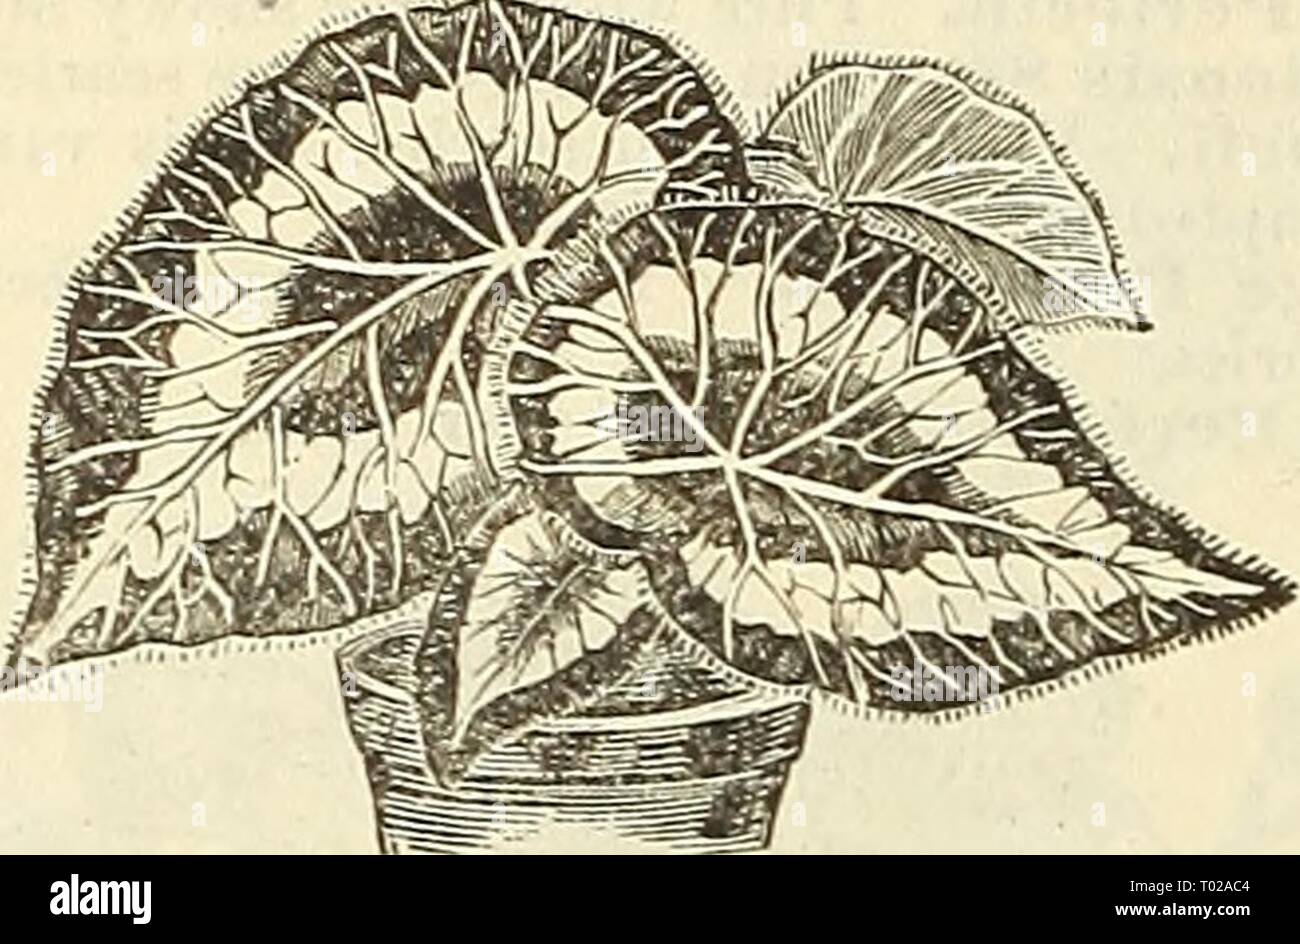 Dreer's garden calendar : 1886 . dreersgardencale1886henr Year: 1886  80 DREER'S GARDEN CALENDAR. BEGONIA REX. (Ornamental Leaved.) We oflfer fifteen of the most distinct and handsomely marked varieties of this beautiful class of Begonias. These are grown for tlieir variegated foliage, and are very desir- able for house and garden decorations, in shady positions, and especially well adapted for baskets, vases, etc. 25 cts. each ; $2.50 per doz.    Begonia Rex. BOUVARDIA. Shrubby plants with corymbs of white, rose, crimson and scarlet flowers, blooming during tlie autumn and winter. Tlieir dazz Stock Photo